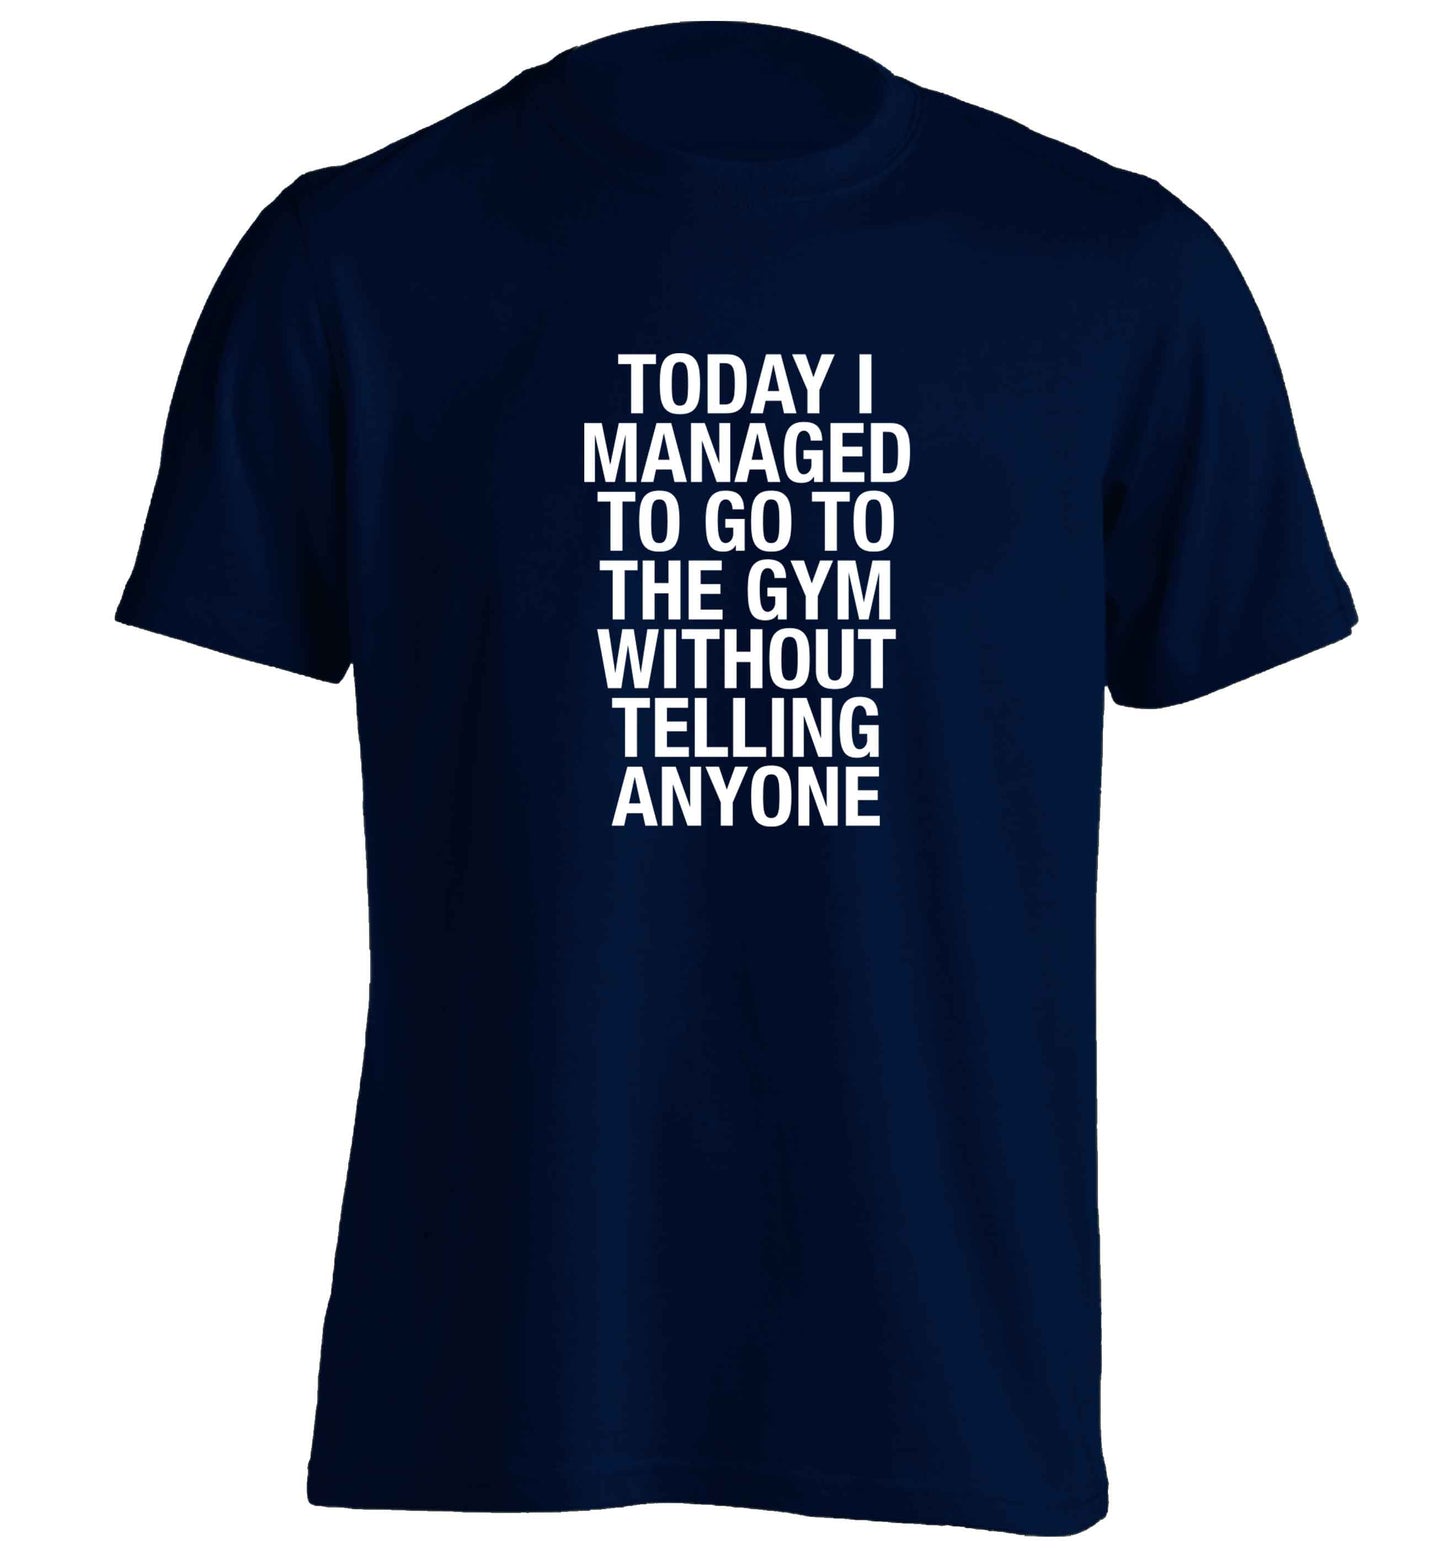 Today I managed to go to the gym without telling anyone adults unisex navy Tshirt 2XL